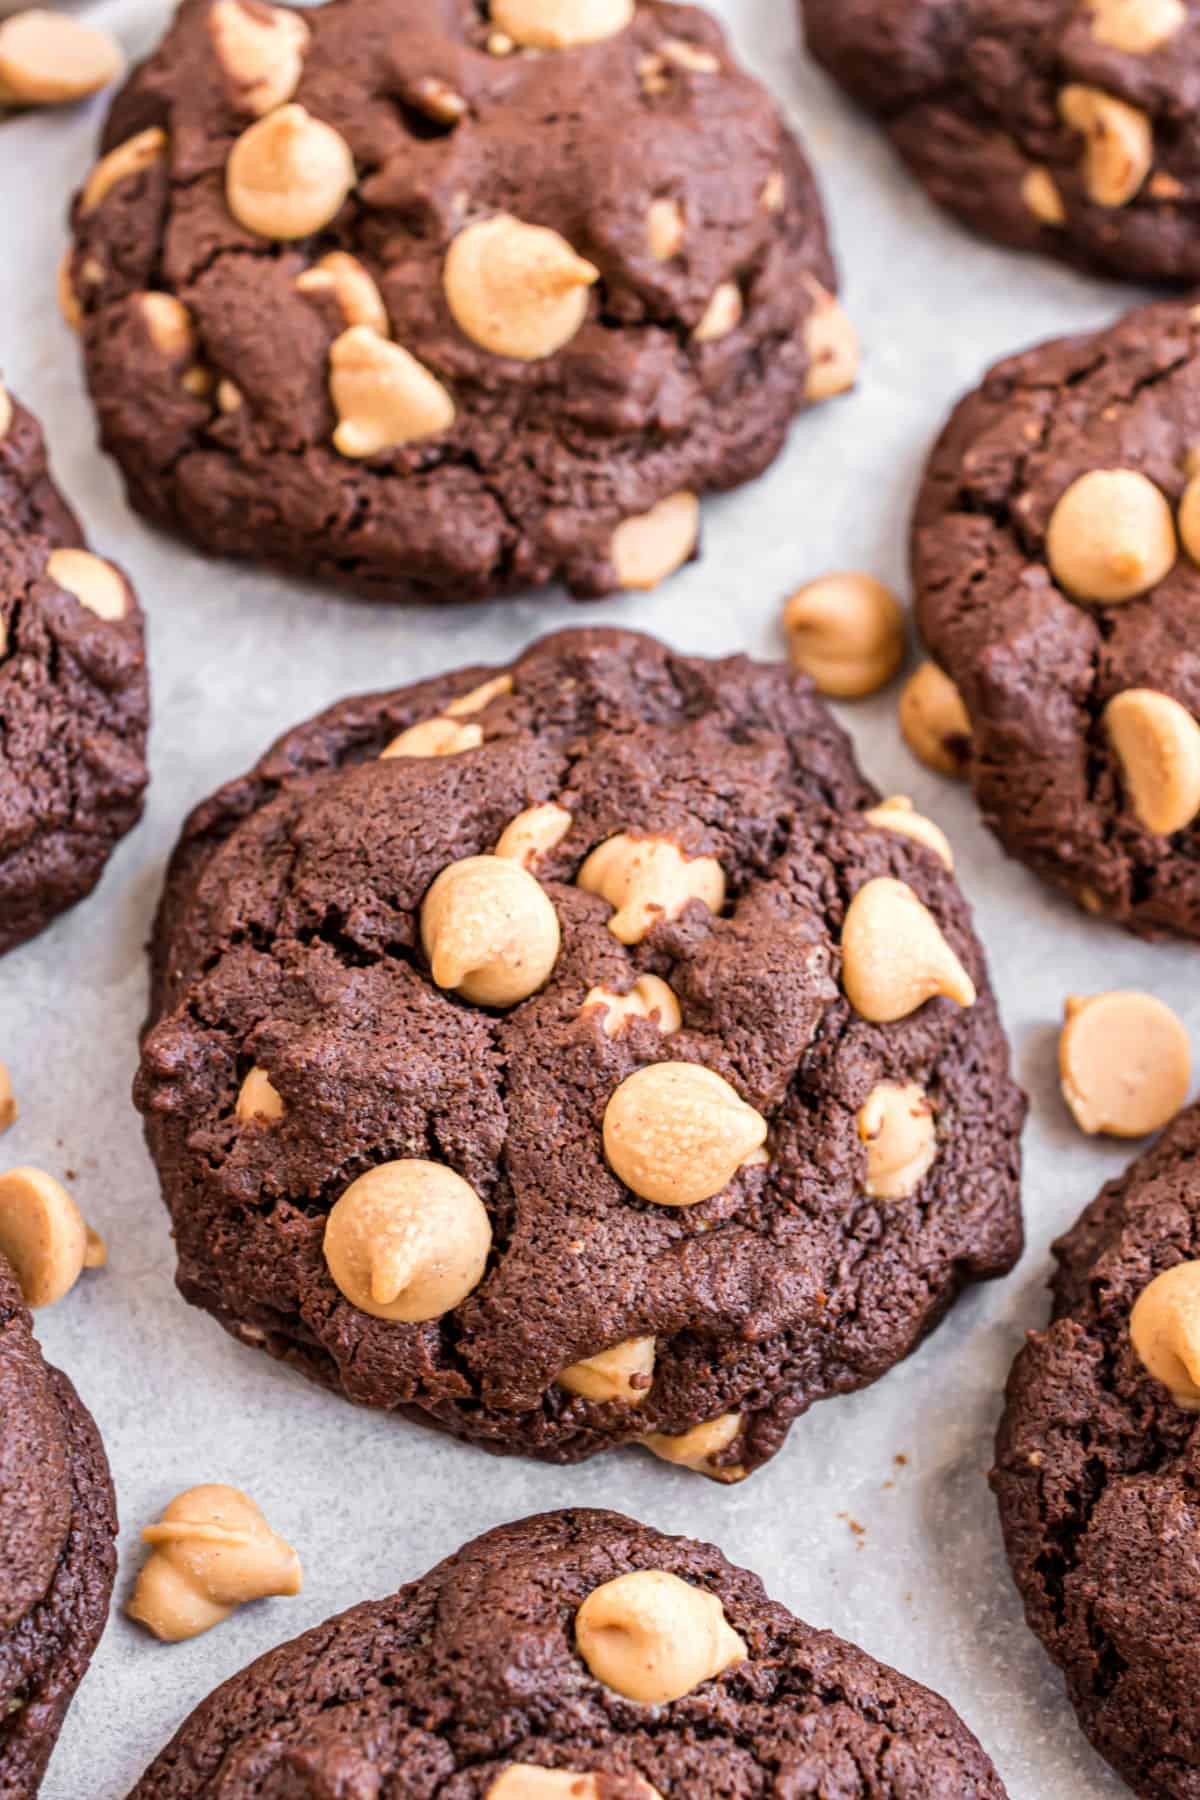 Chocolate Peanut Butter Cookies Recipe - Shugary Sweets